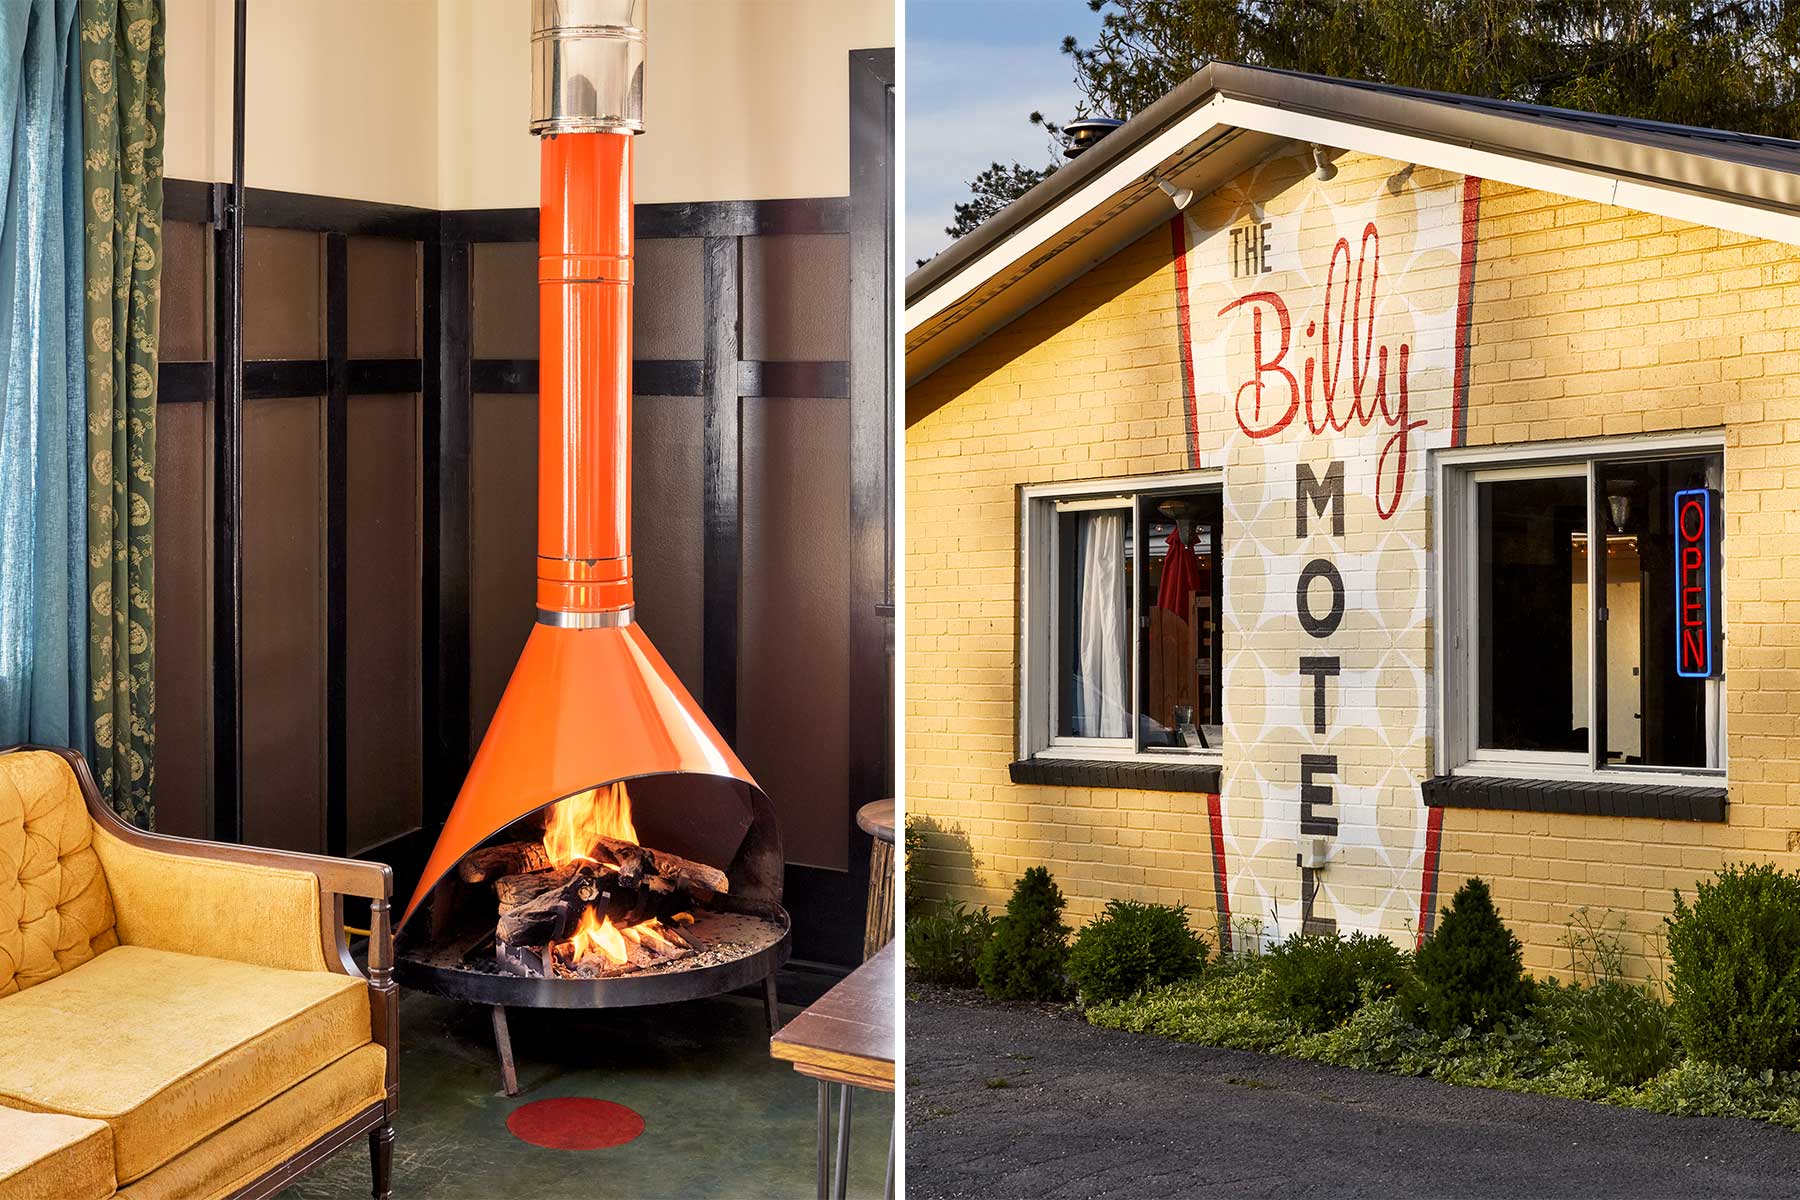 Two photos show the retro decor of The Billy Motel, in West Virginia